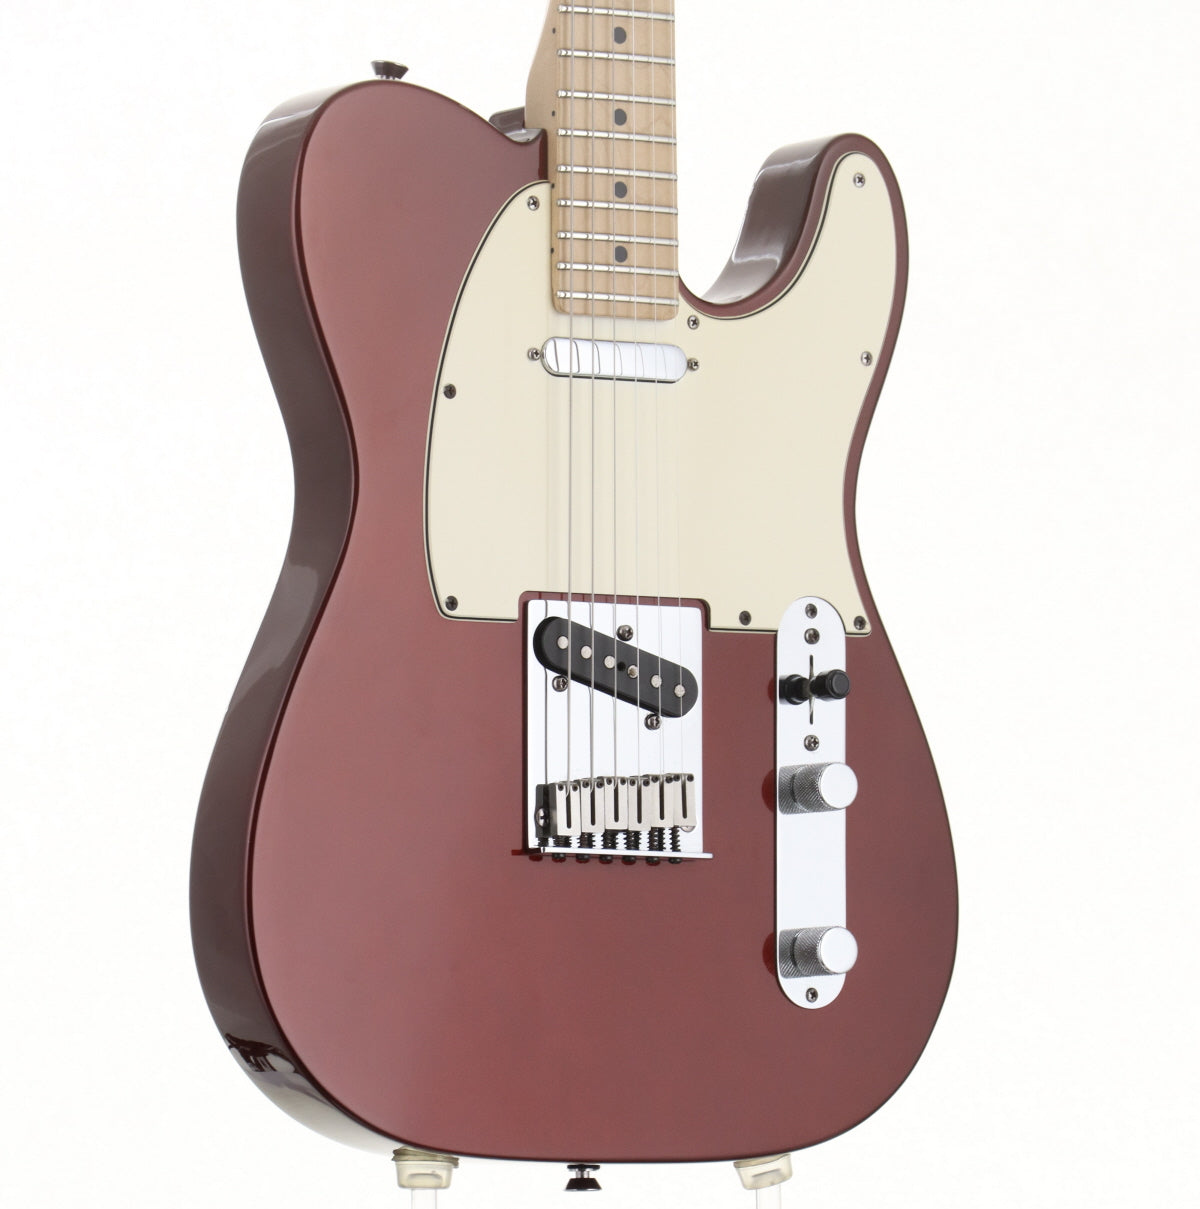 [SN Z7041567] USED Fender USA / American Telecaster Maple Fingerboard 2007 Candy Cola [06]